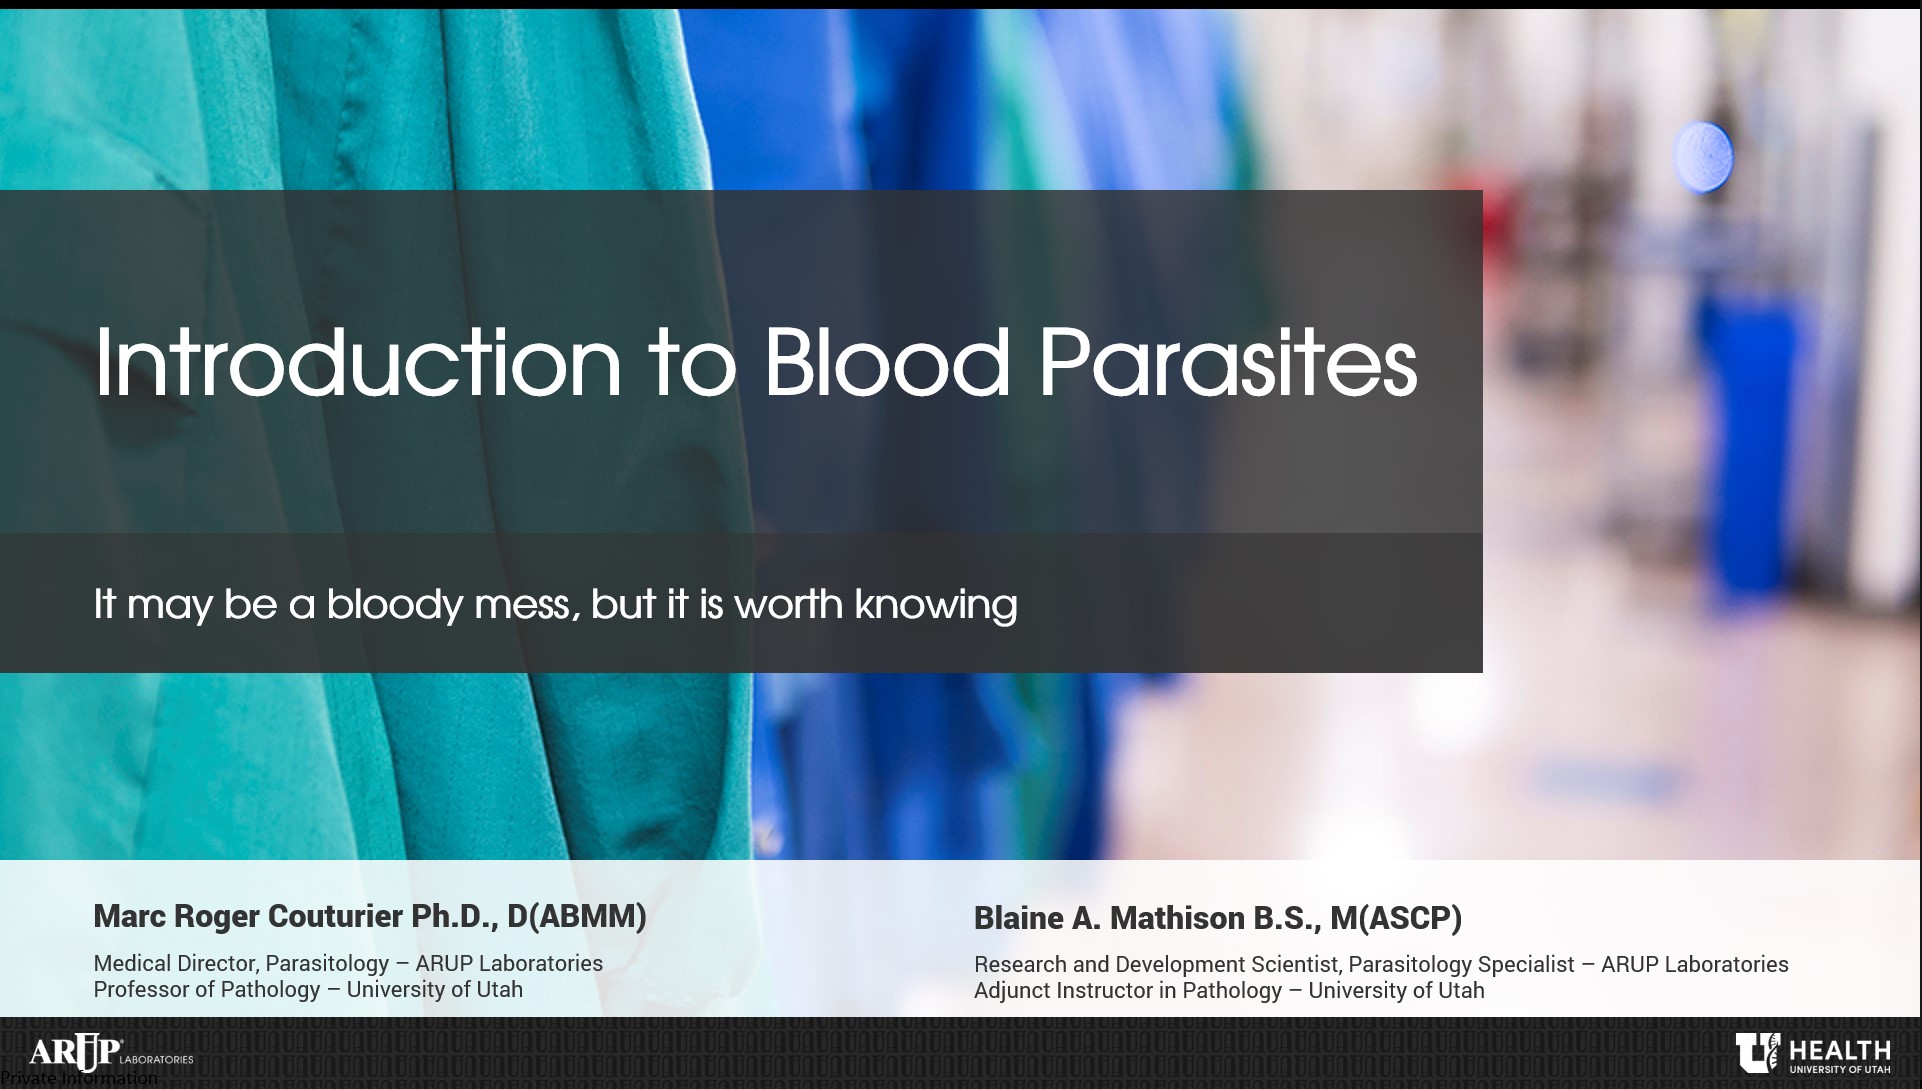 Introduction to Blood Parasites: It May Be a Bloody Mess, But It Is Worth Knowing